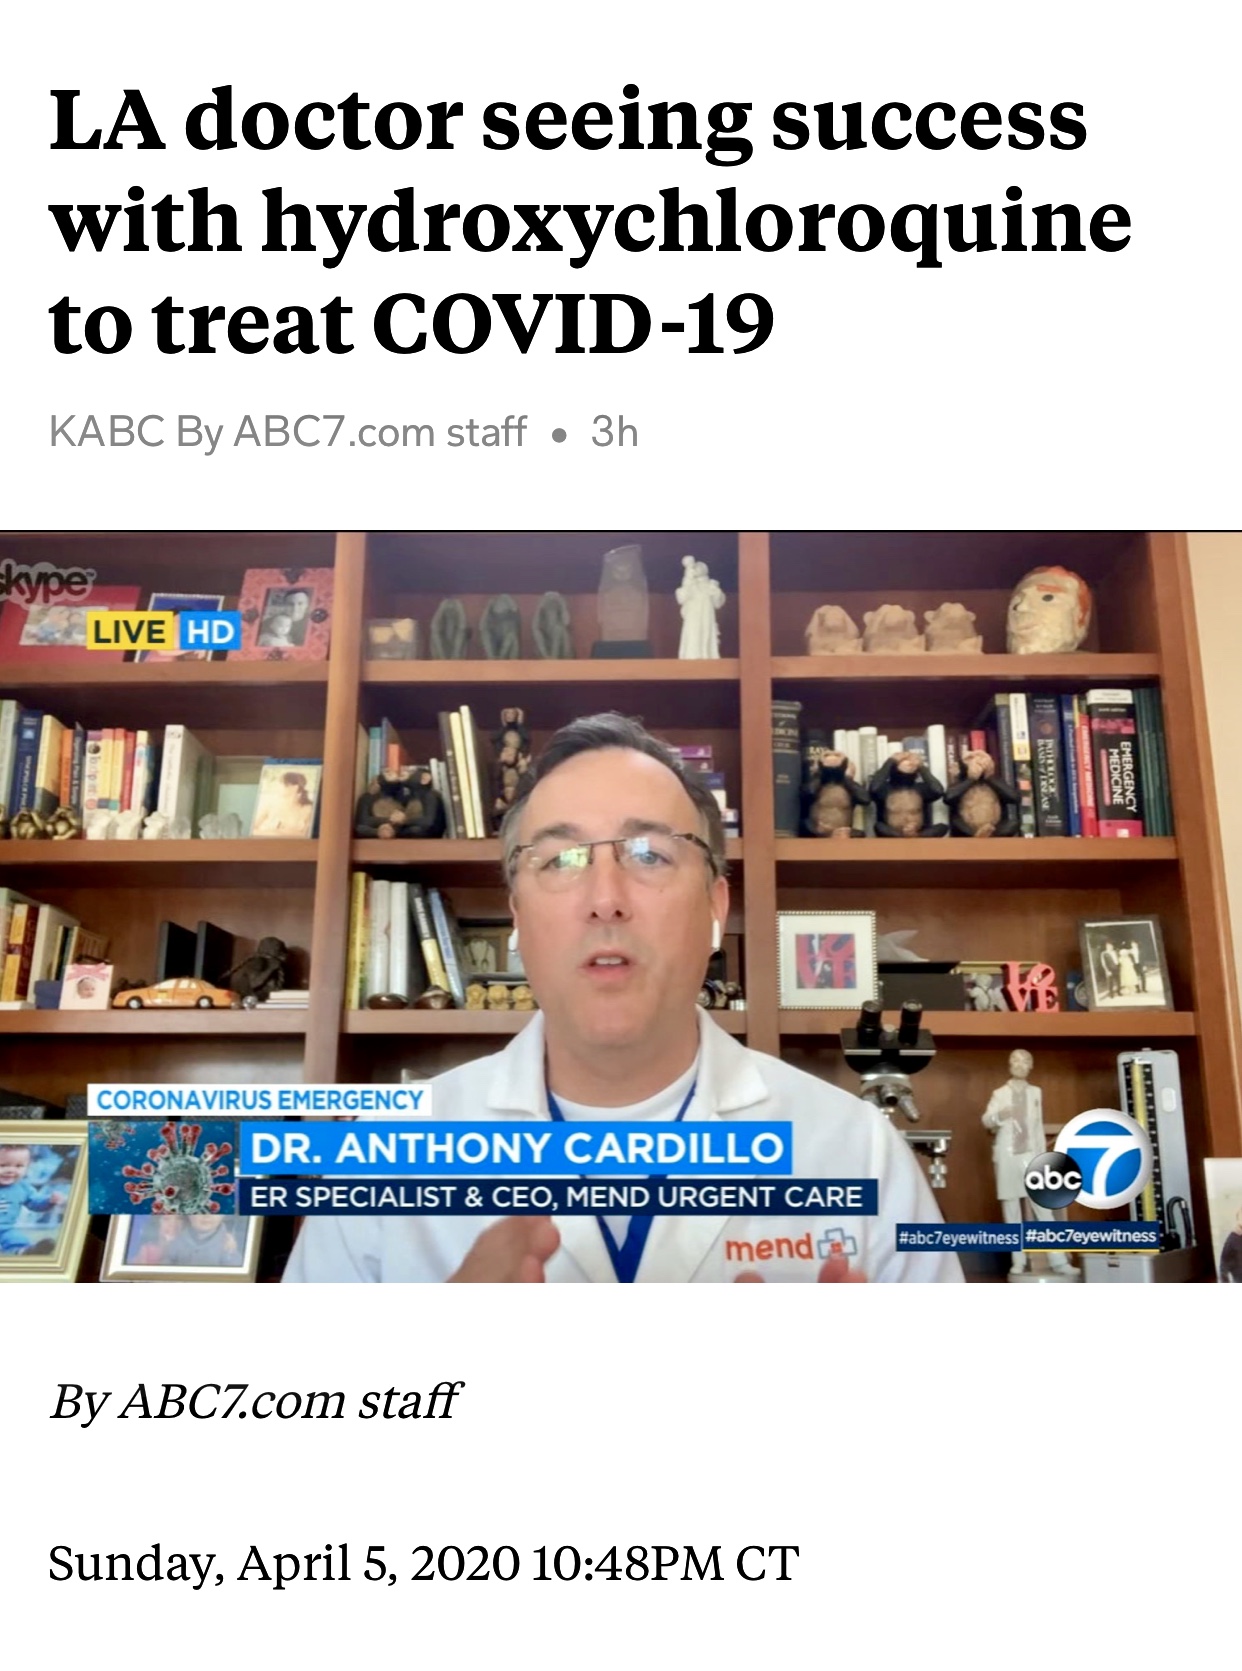 LA Doctor is Seeing Success with Hydroxychloroquine to Treat Covid-19